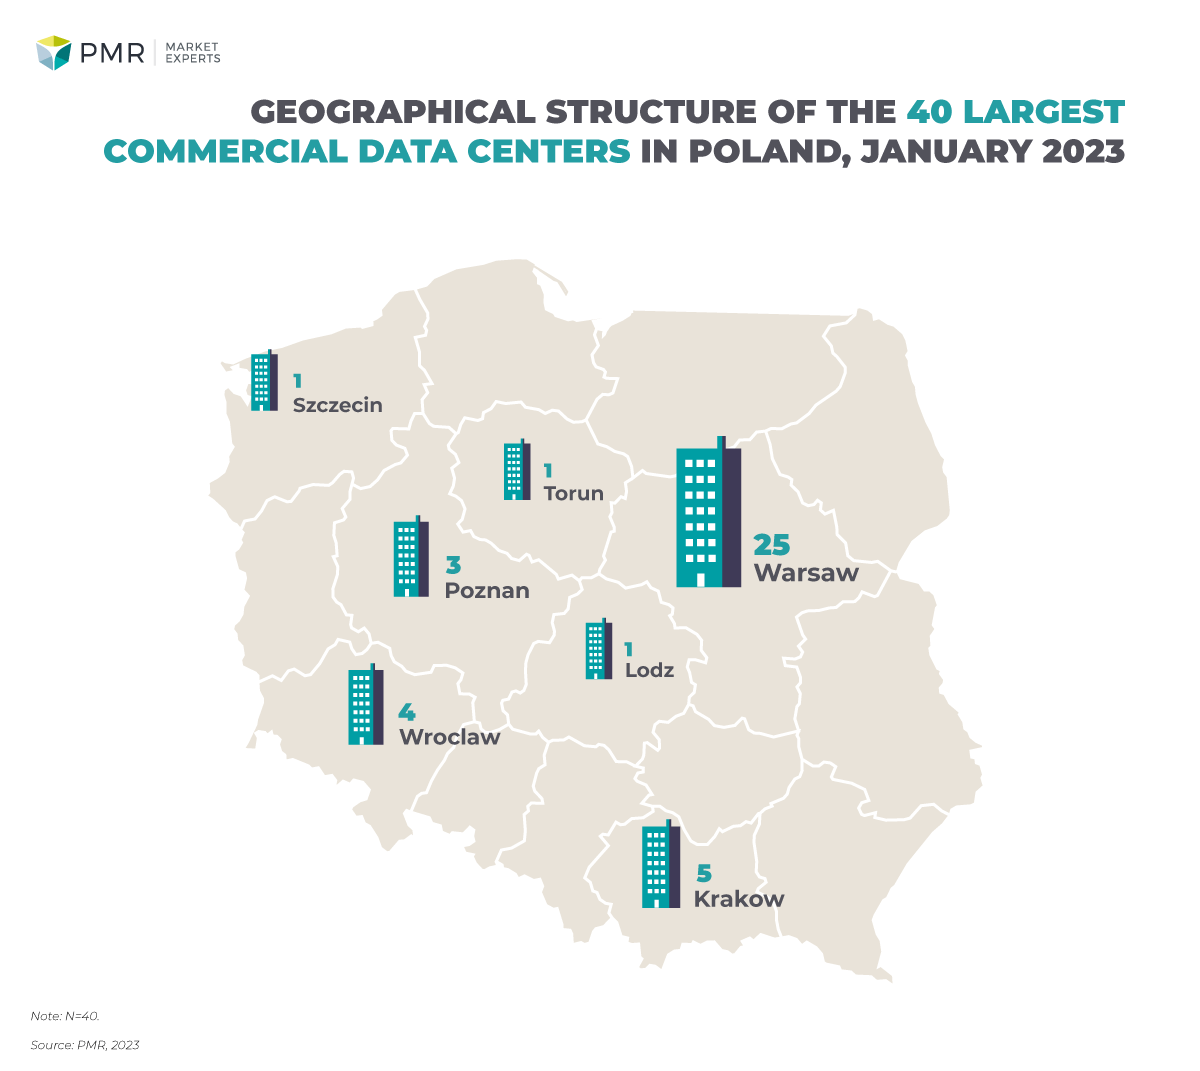 Geographical structure of the 40 largest commercial data centers in Poland (%), January 2023